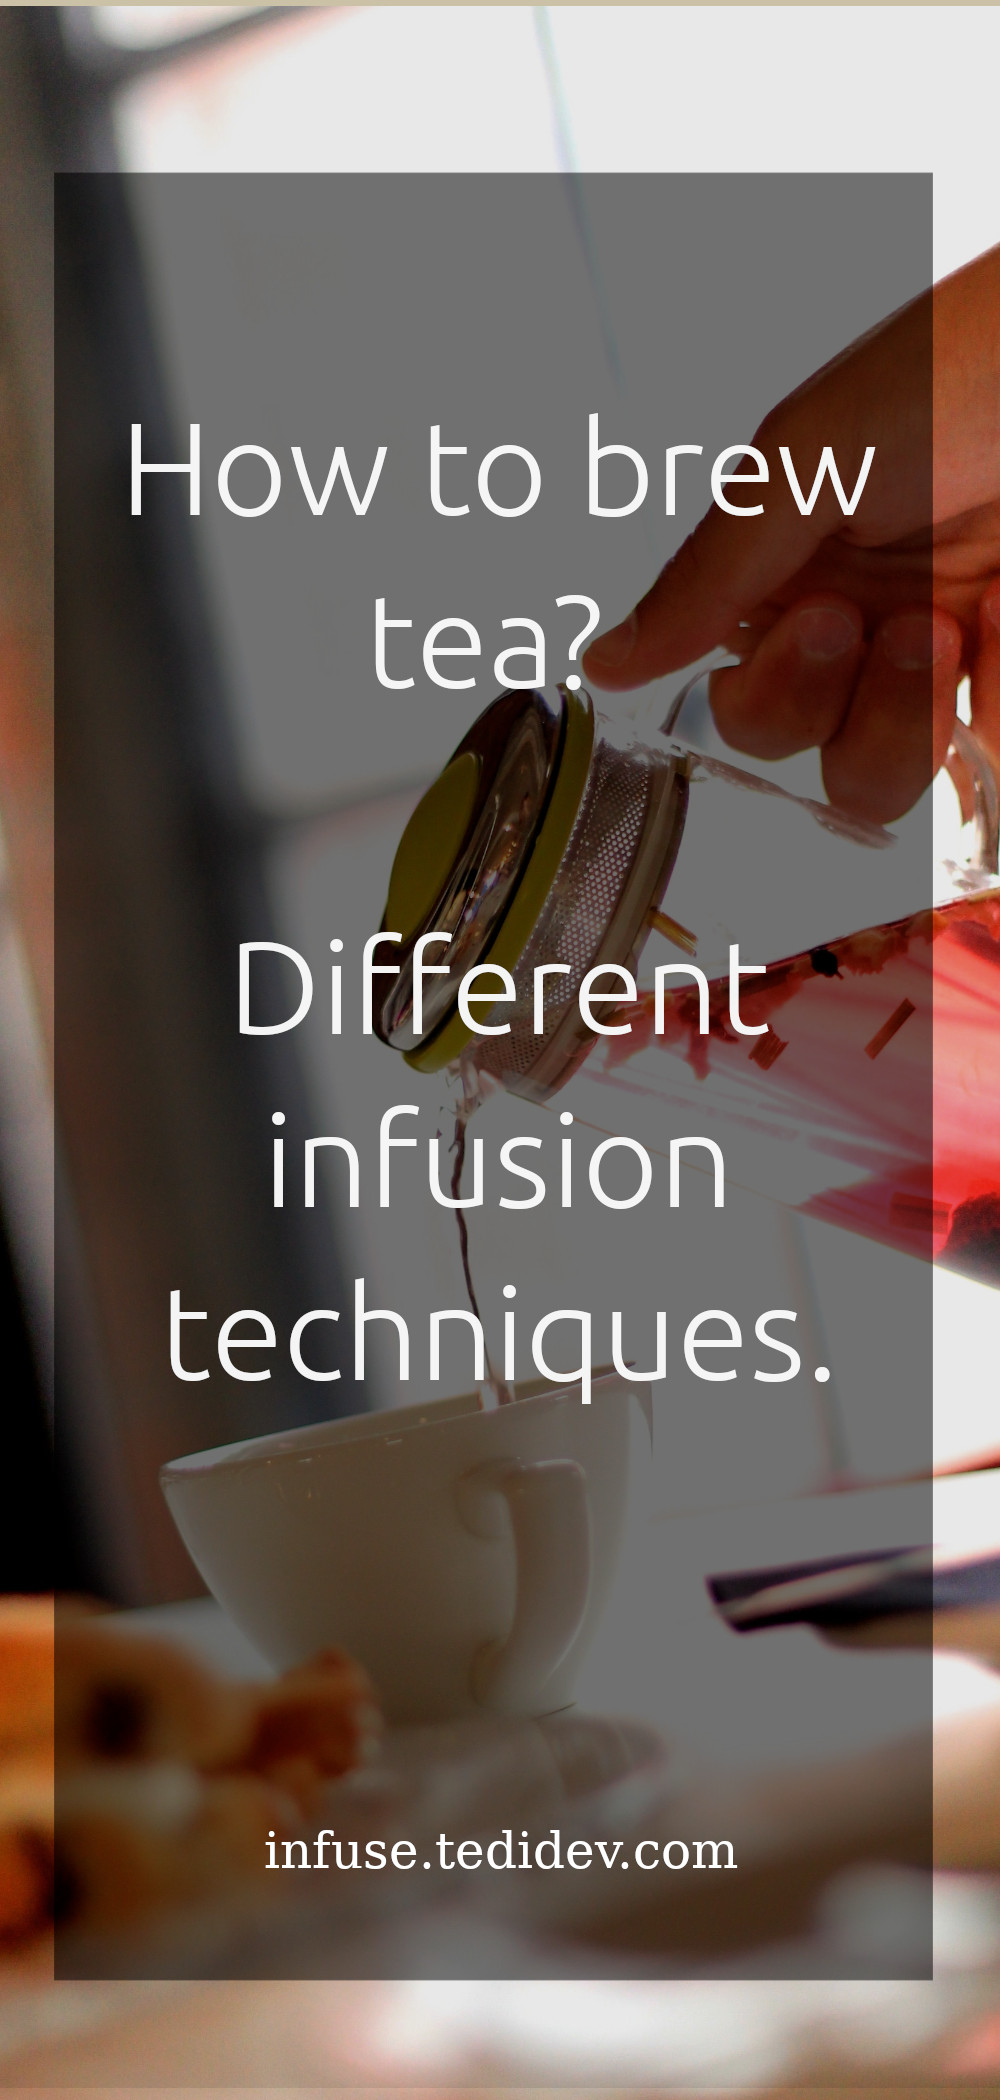 How to brew tea? different infusion techniques